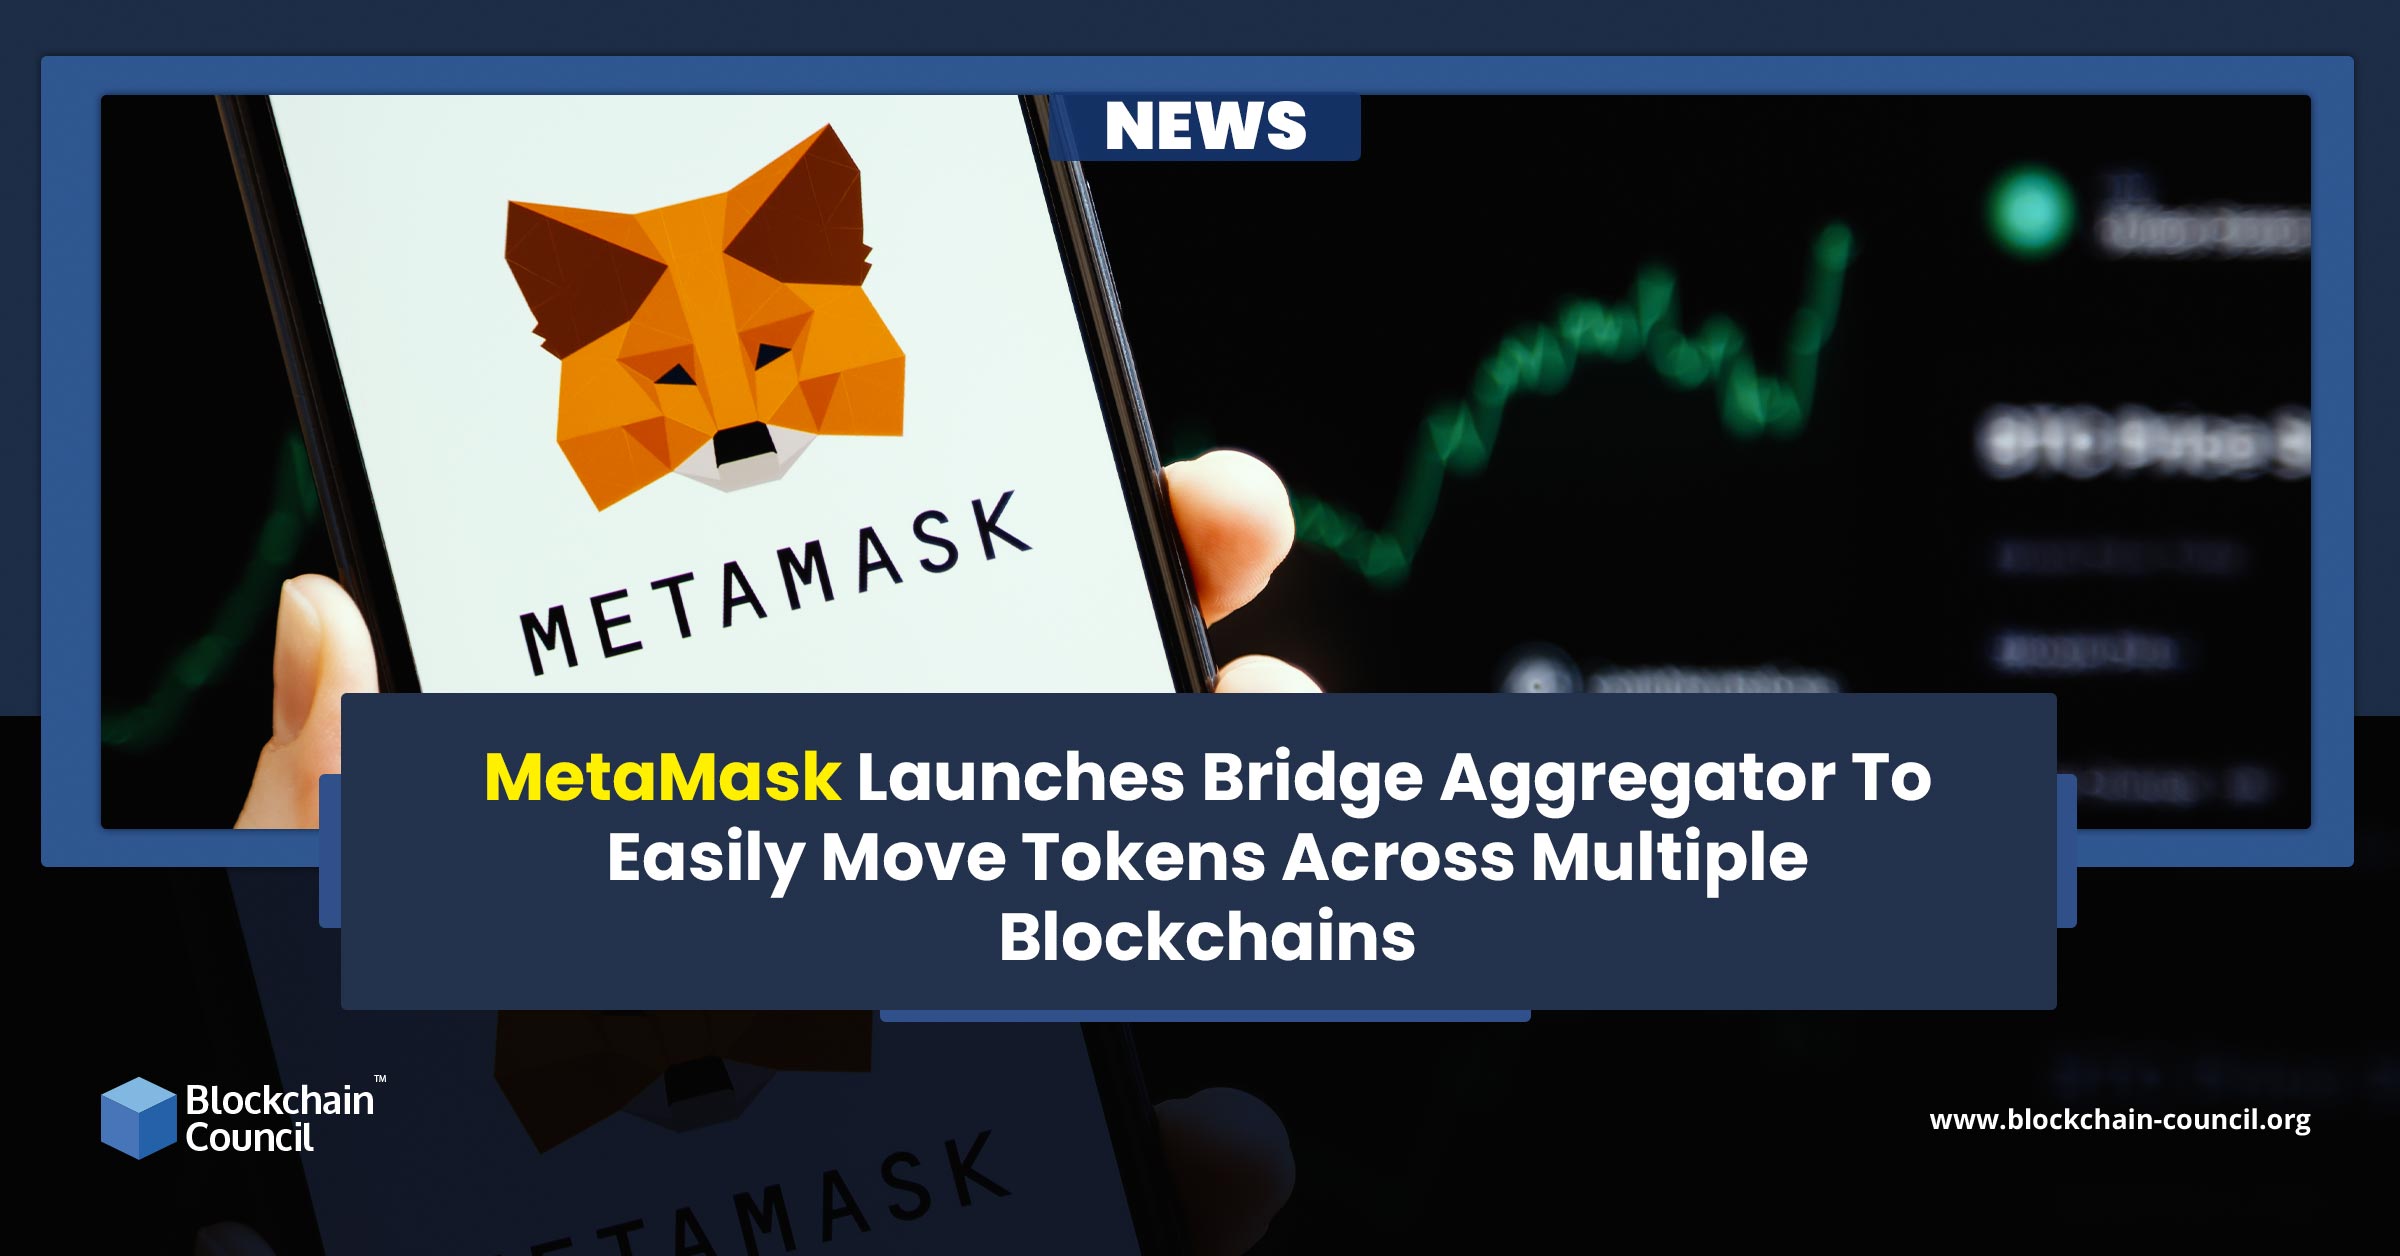 MetaMask Launches Bridge Aggregator To Easily Move Tokens Across Multiple Blockchains